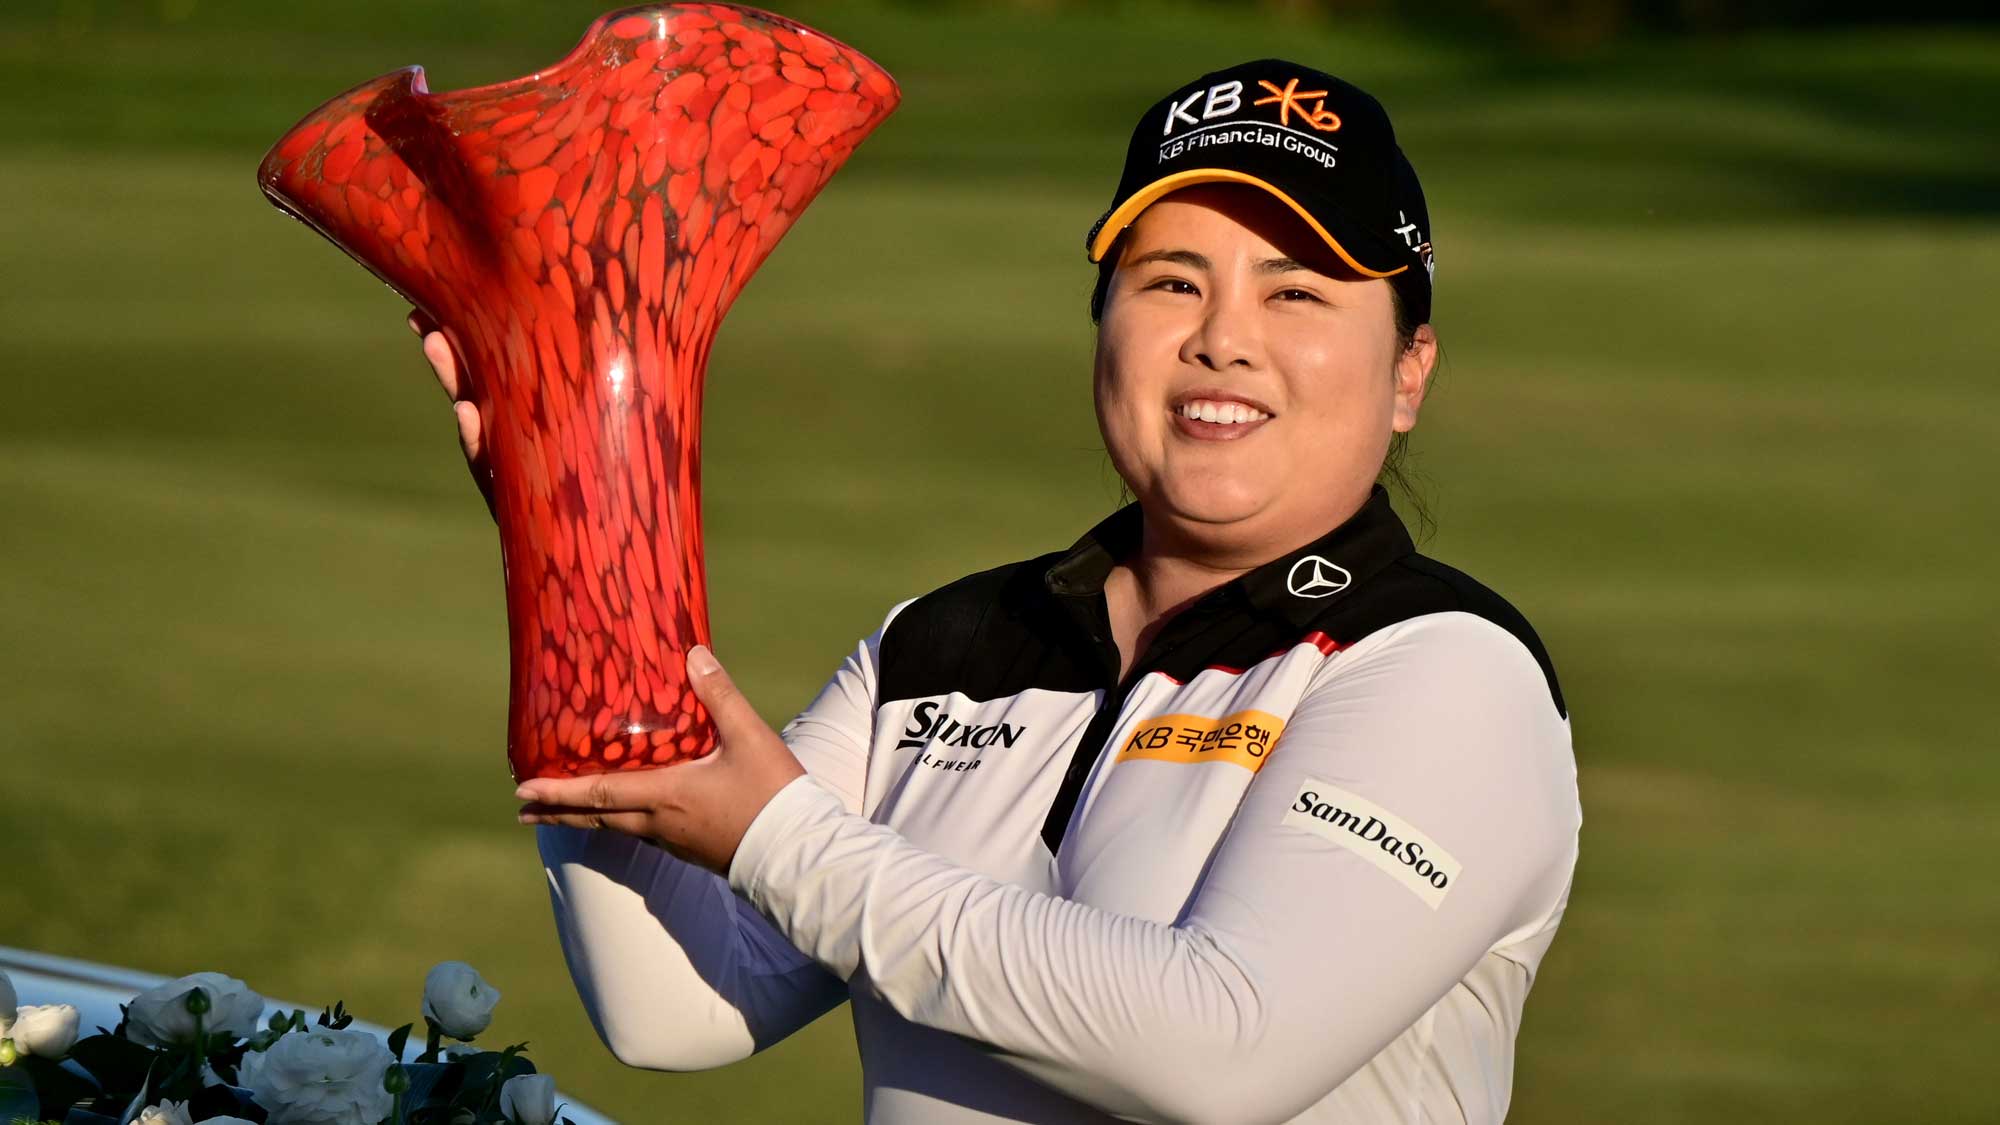 Inbee Park of South Korea holds the winners trophy after her -14 under par victory during the Final Round of the KIA Classic at the Aviara Golf Club on March 28, 2021 in Carlsbad, California.